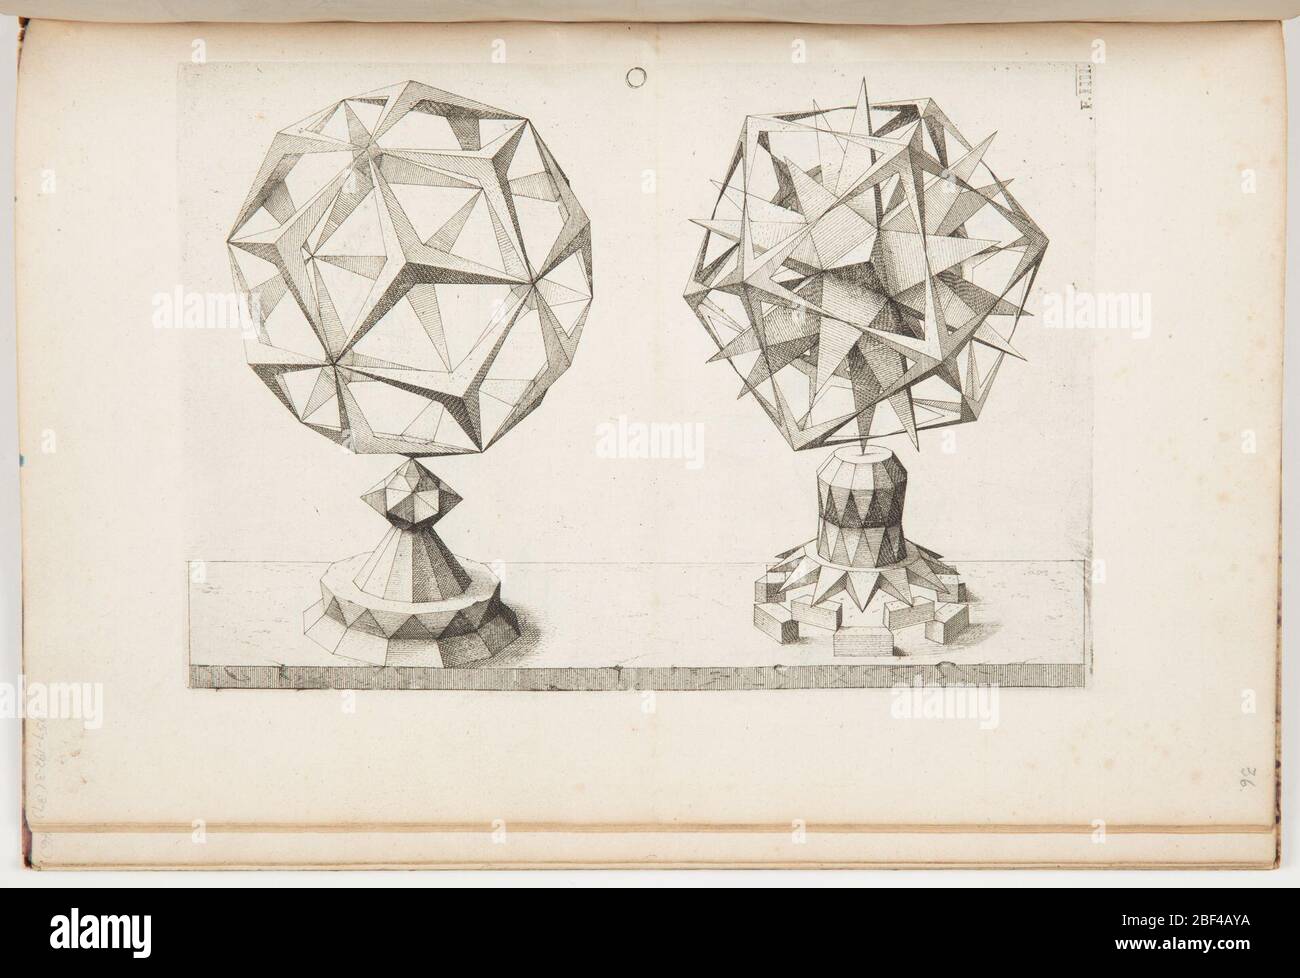 Plate O FIIII Rhombentrikontaeder und Ikosaeder Rhombic Triacontrahedron and Icosahedron Perspectiva Corporum Regularium Perspective of the Regular Bodies. Plate from Jamnitzer's compendium of perspectival geometry, Perspectiva Corporum Regularium (Perspective of the Regular Bodies) showing two polyhedral variants. The book is based on the five Platonic solids or 'regular bodies.' Stock Photo